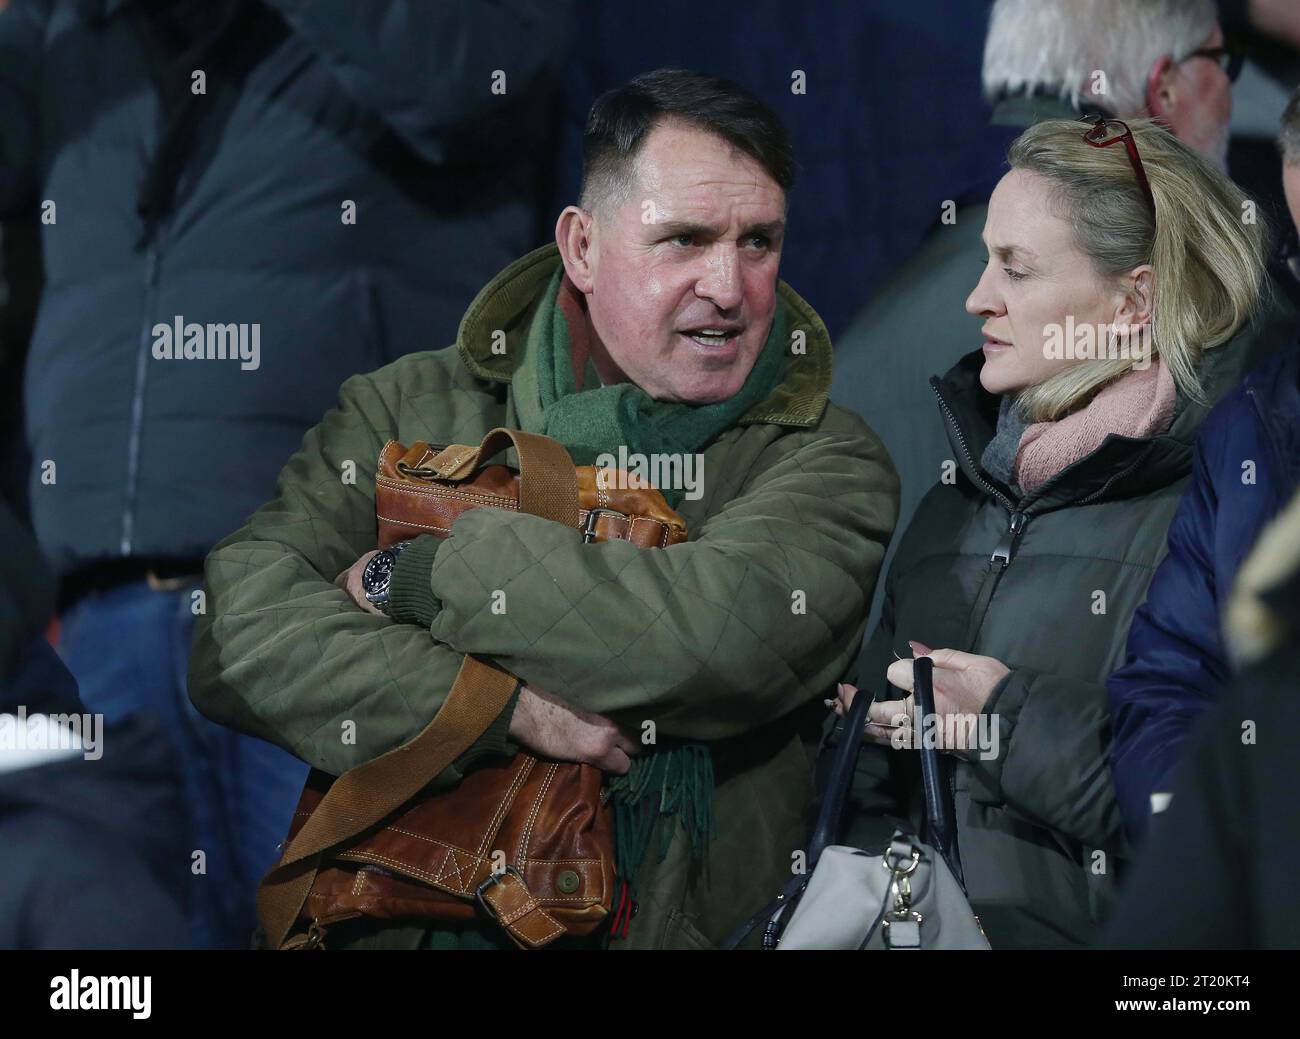 Martin Allen Football manager. - Crystal Palace v Manchester United, Premier League, Selhurst Park Stadium, Croydon, UK - 18th January 2023. Editorial Use Only - DataCo restrictions apply. Stock Photo